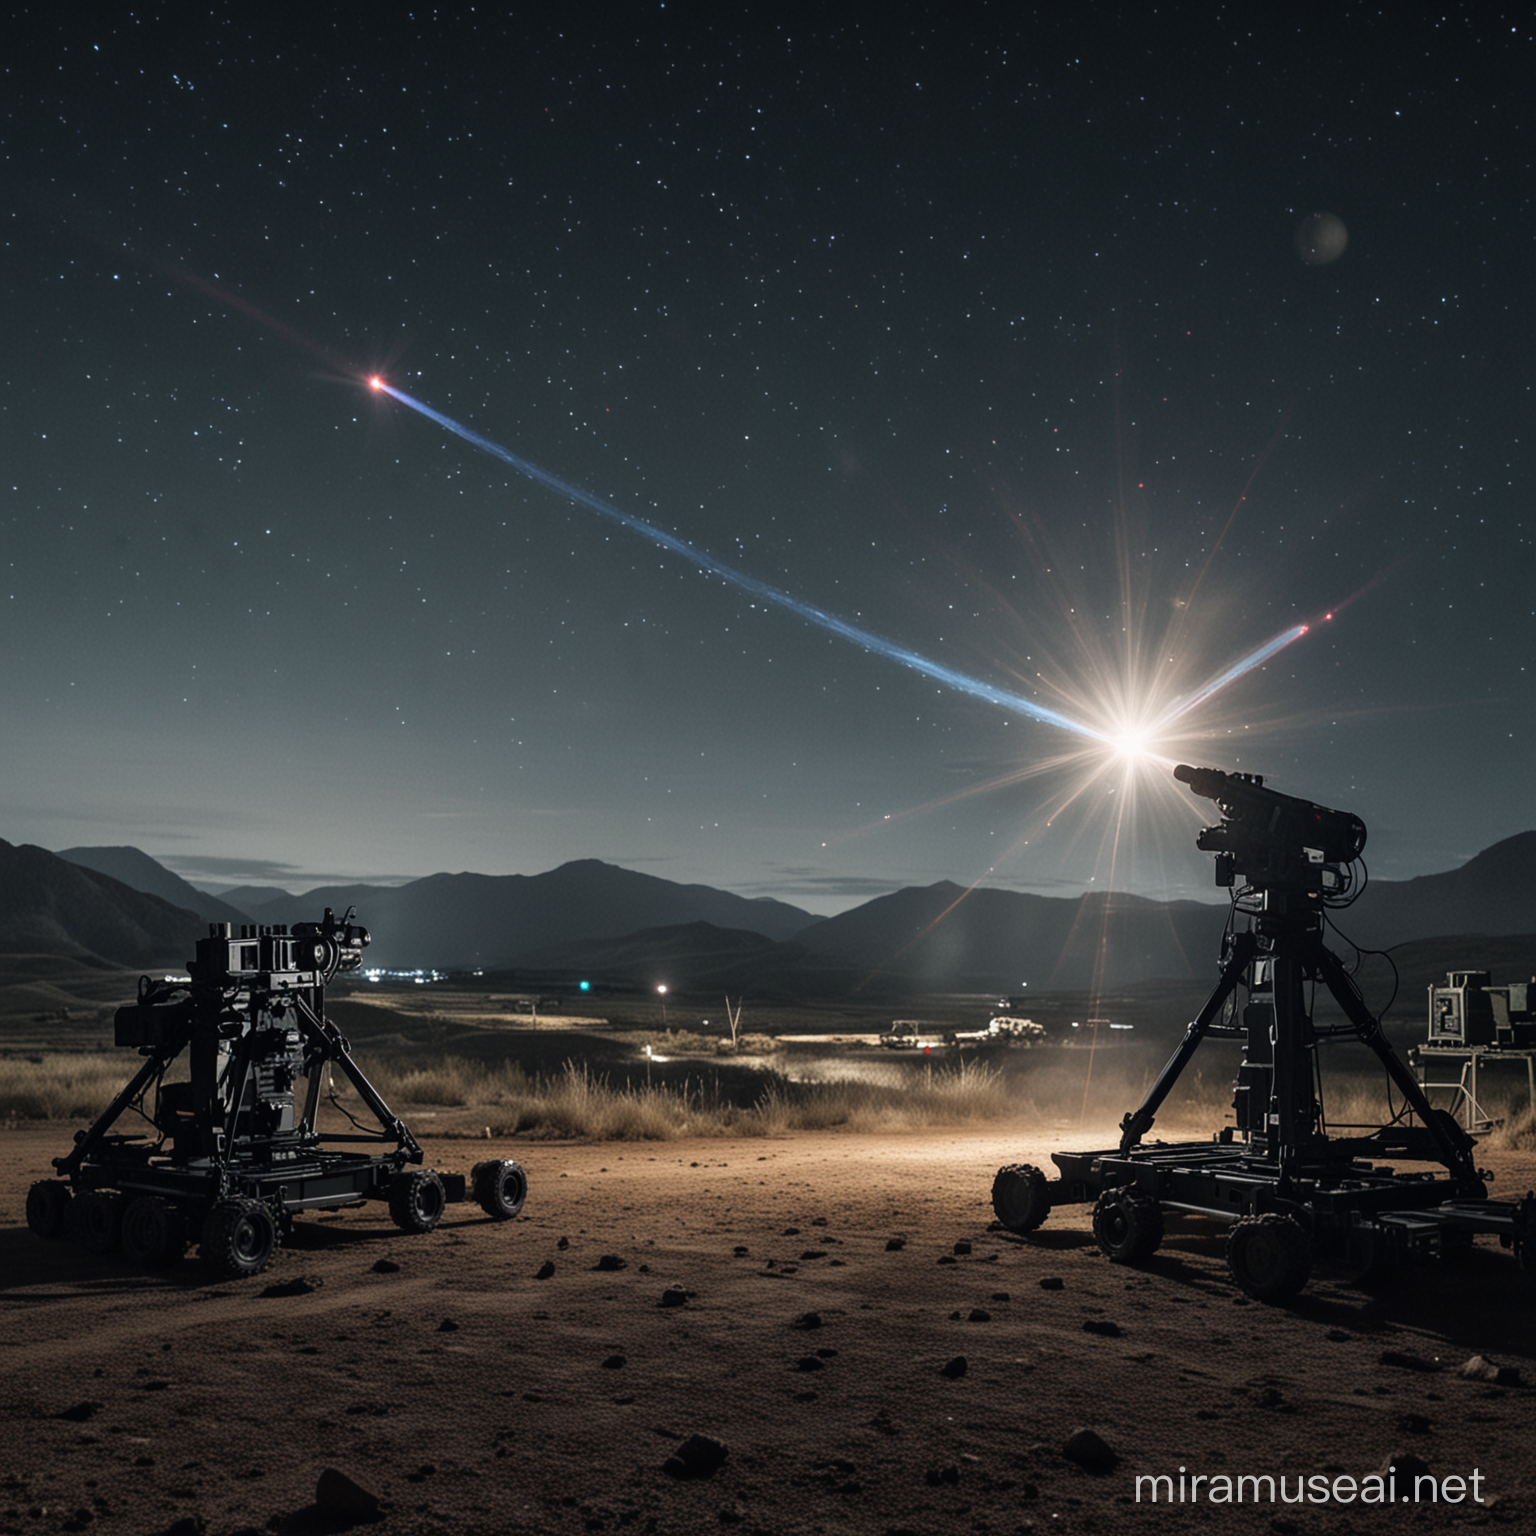 military drill involving firing of laser weapons at night, in a remote location, realistic military equipment, HD.